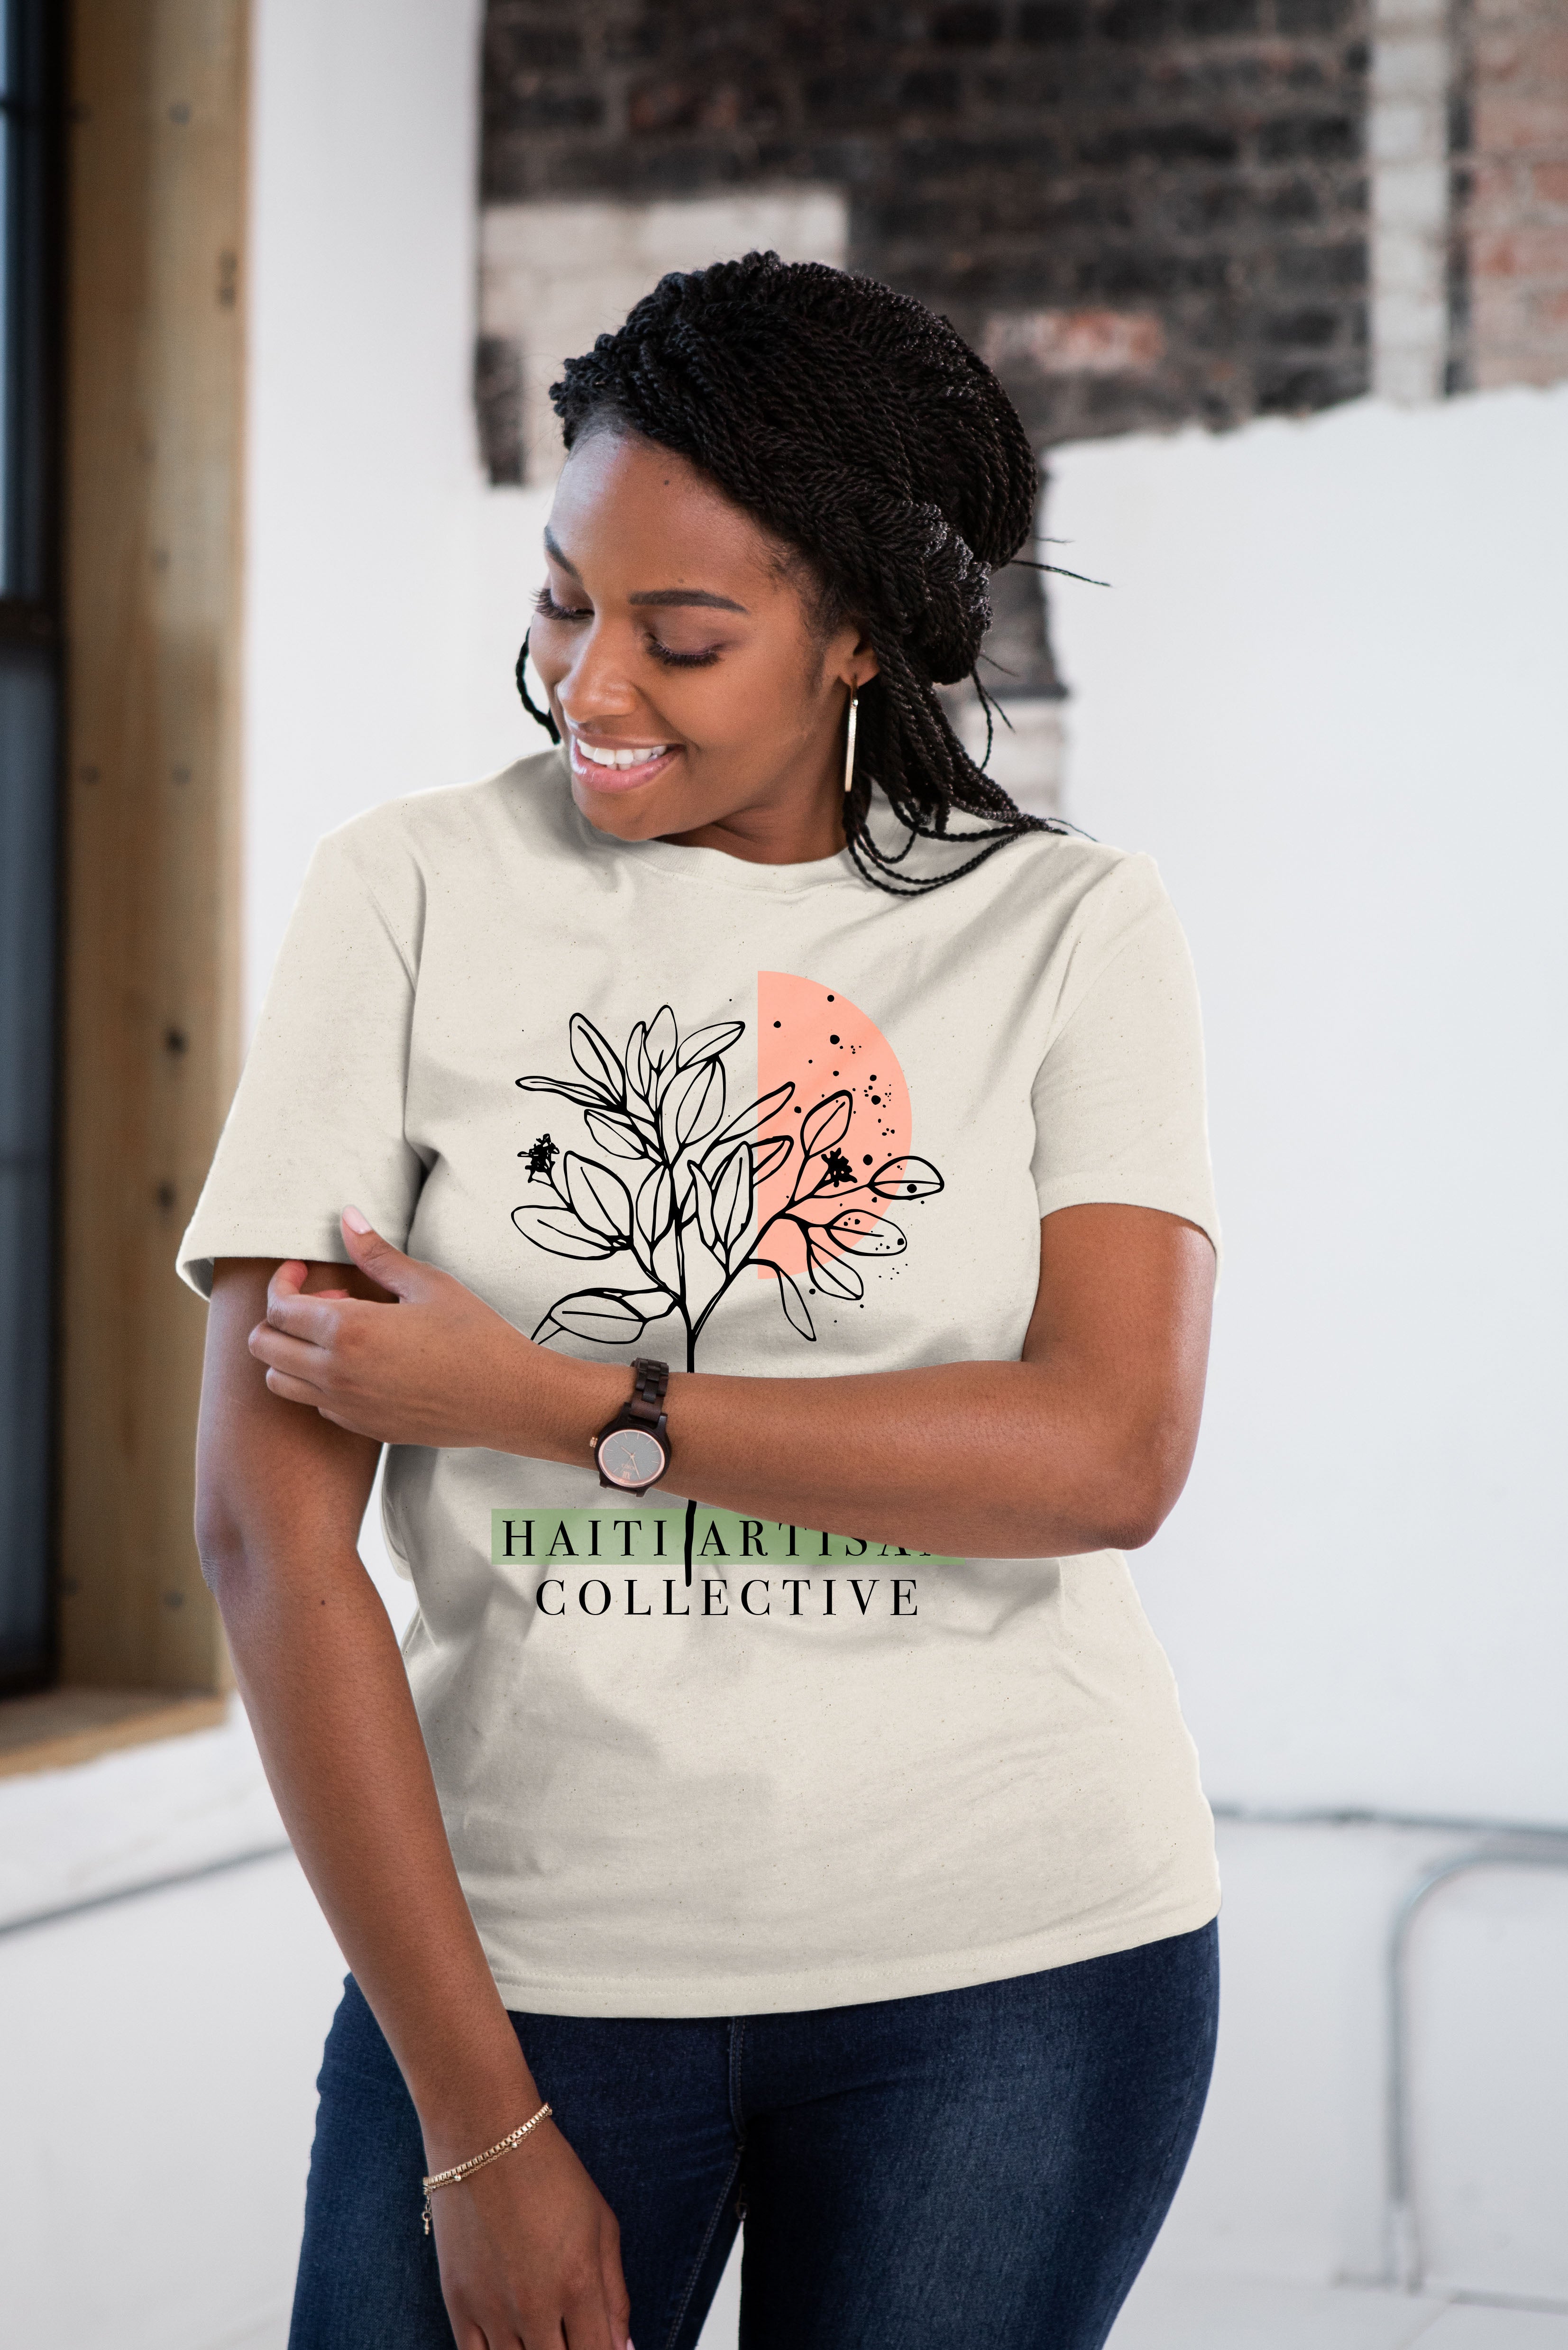 Female model wearing ivory tee with black illustrated flowers and Haiti Artisan Collective logo